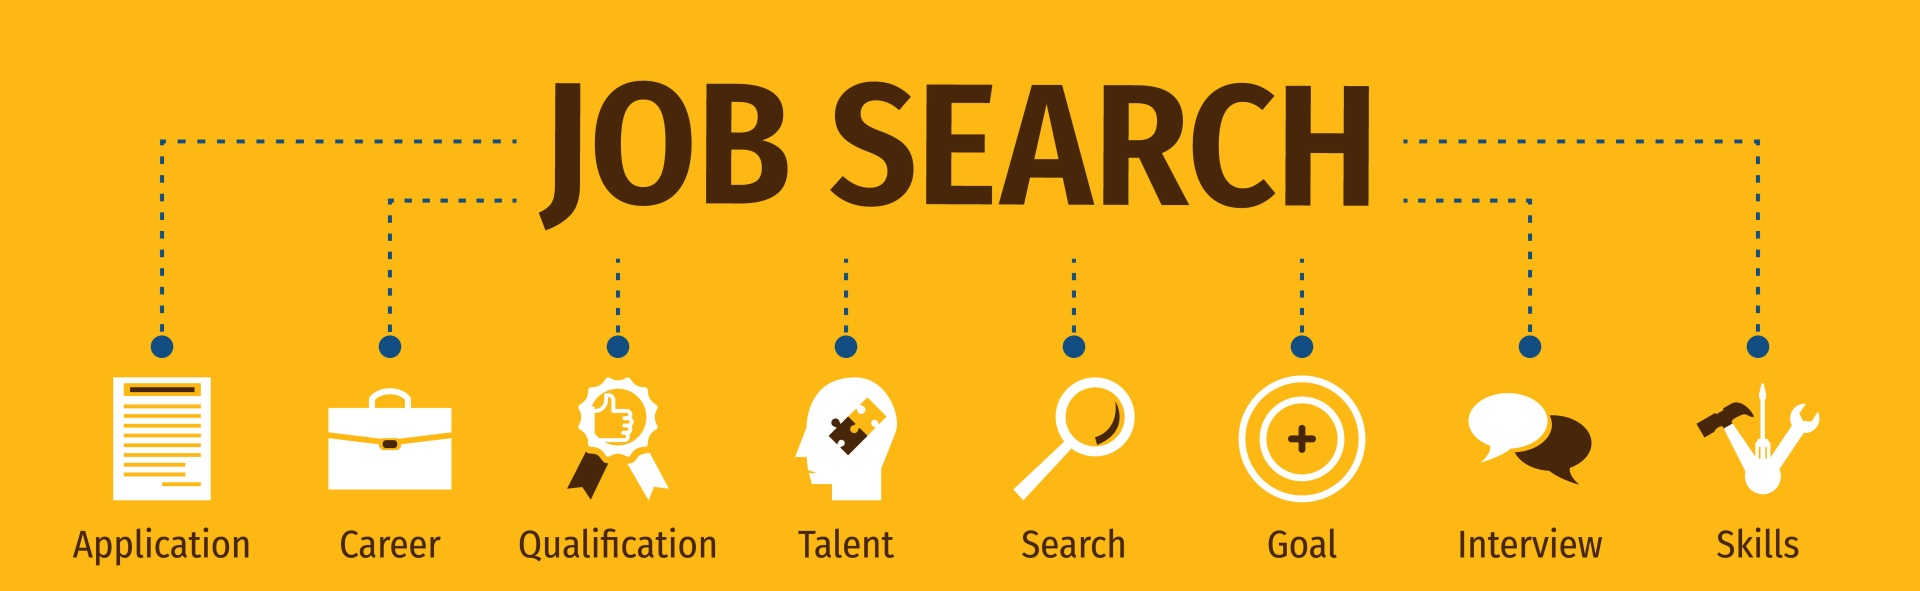 a icon that showcases the job search process from goal setti